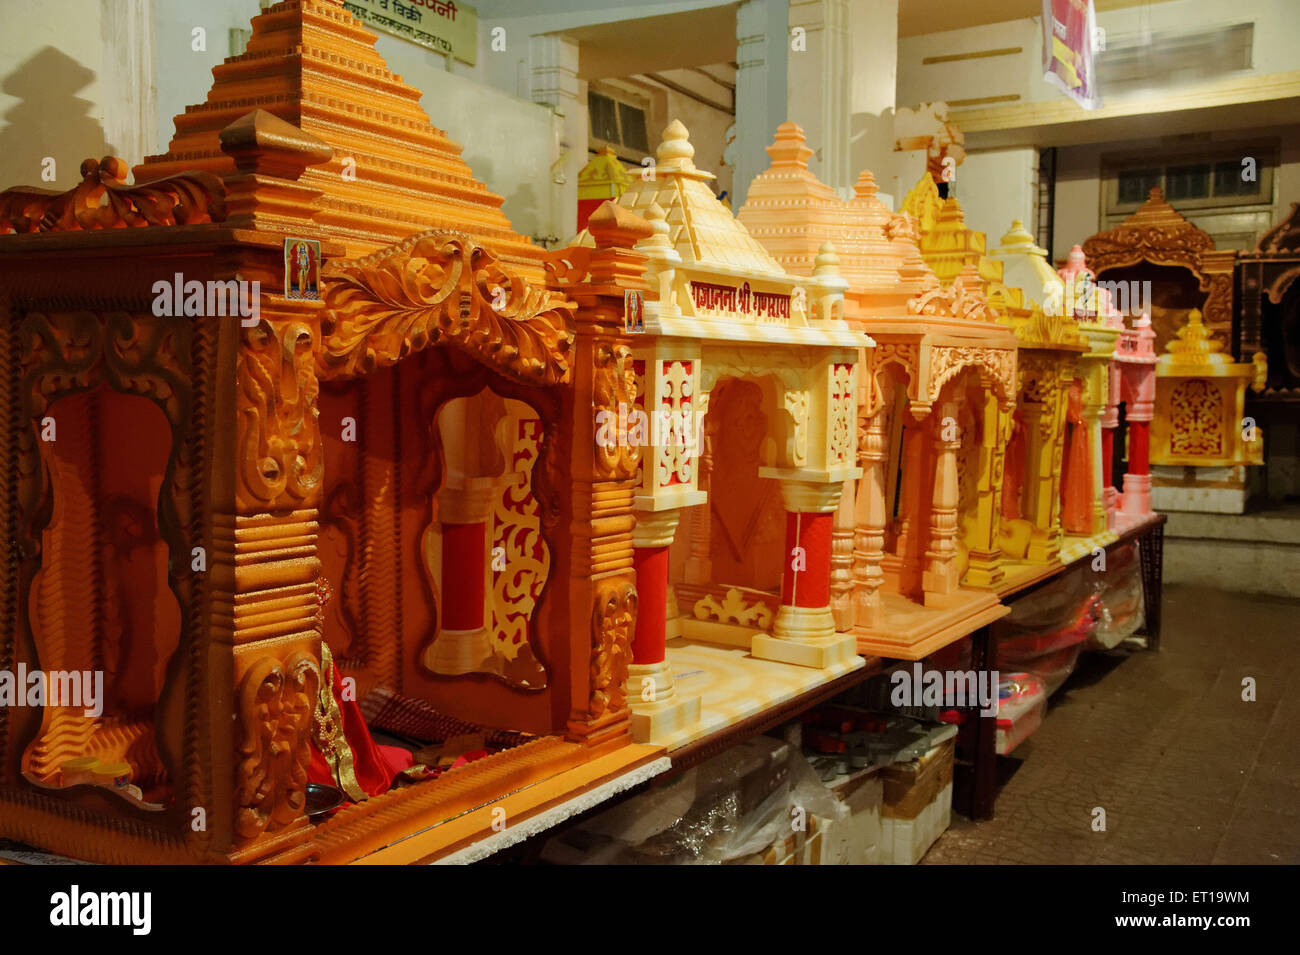 Temple made of Thermocol for Ganesh Festival at Dadar Mumbai Asia Stock Photo